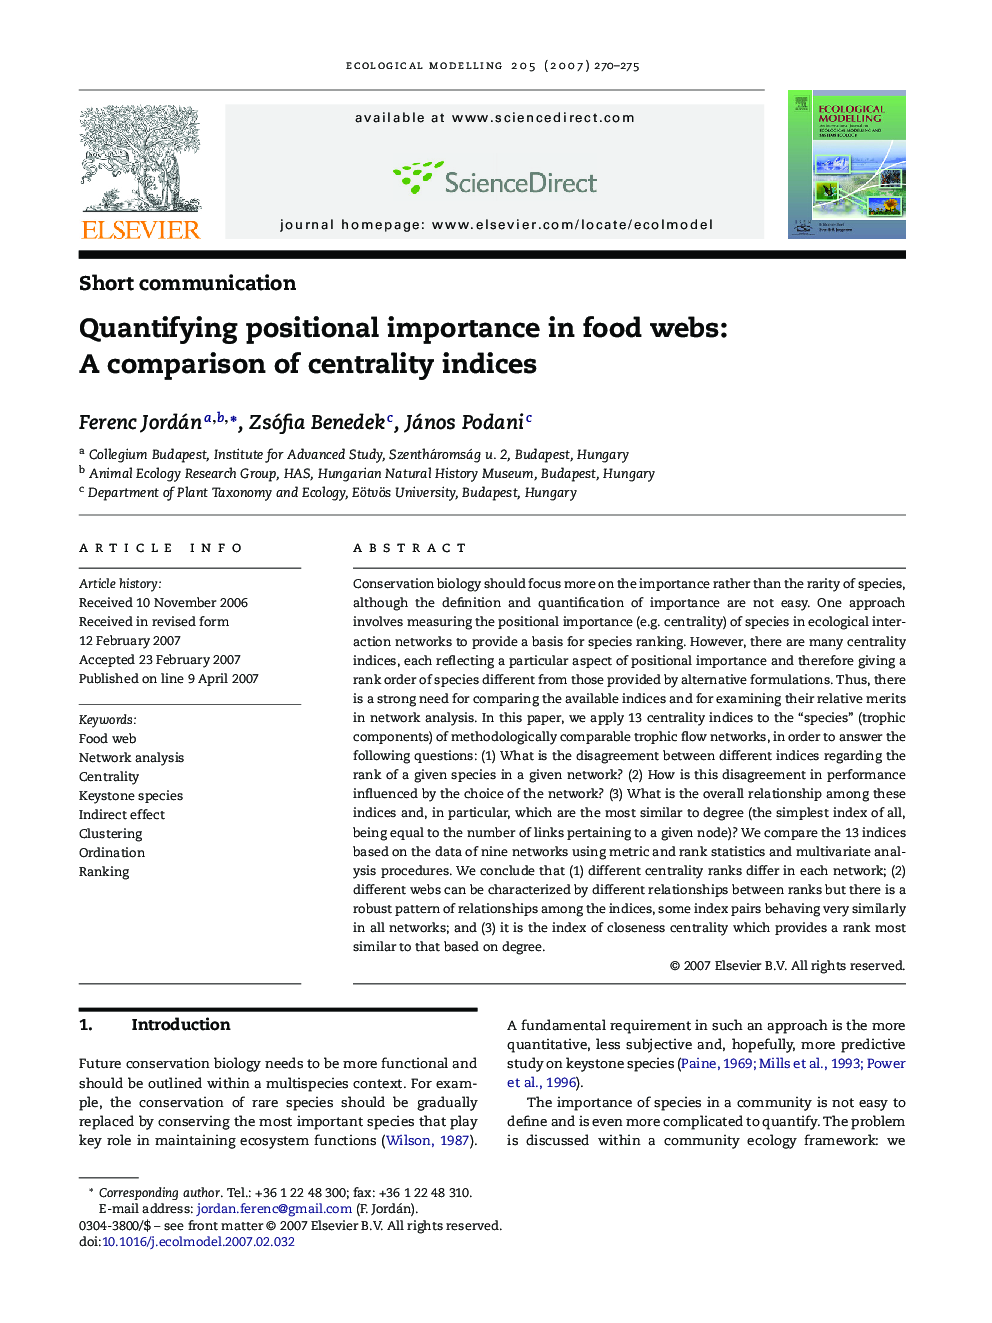 Quantifying positional importance in food webs: A comparison of centrality indices